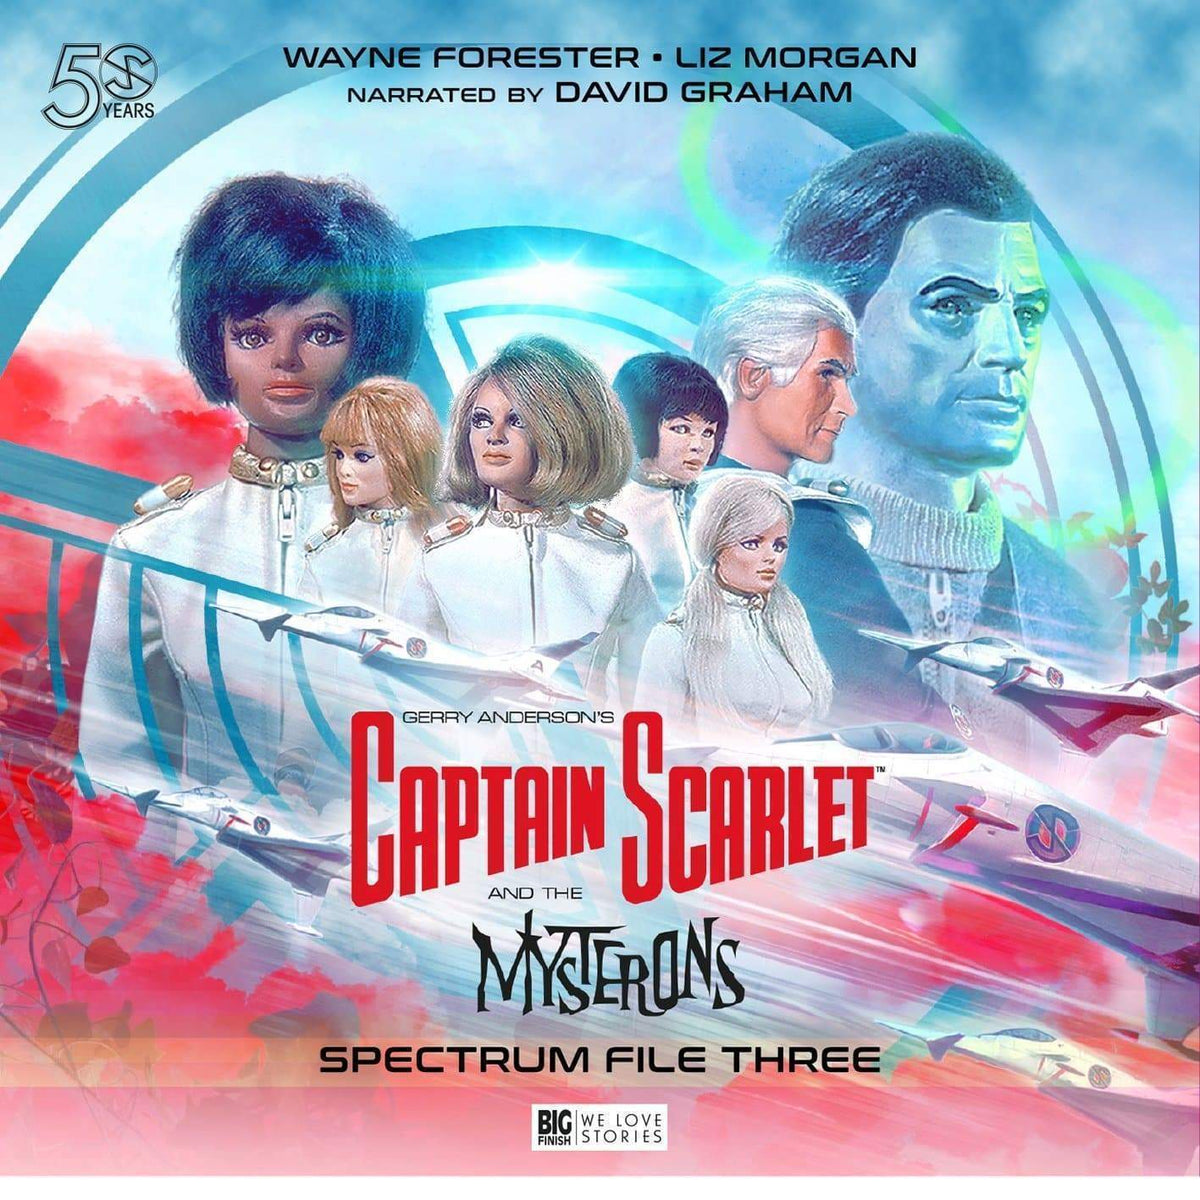 Captain Scarlet - Spectrum File 3 [DOWNLOAD] - The Gerry Anderson Store